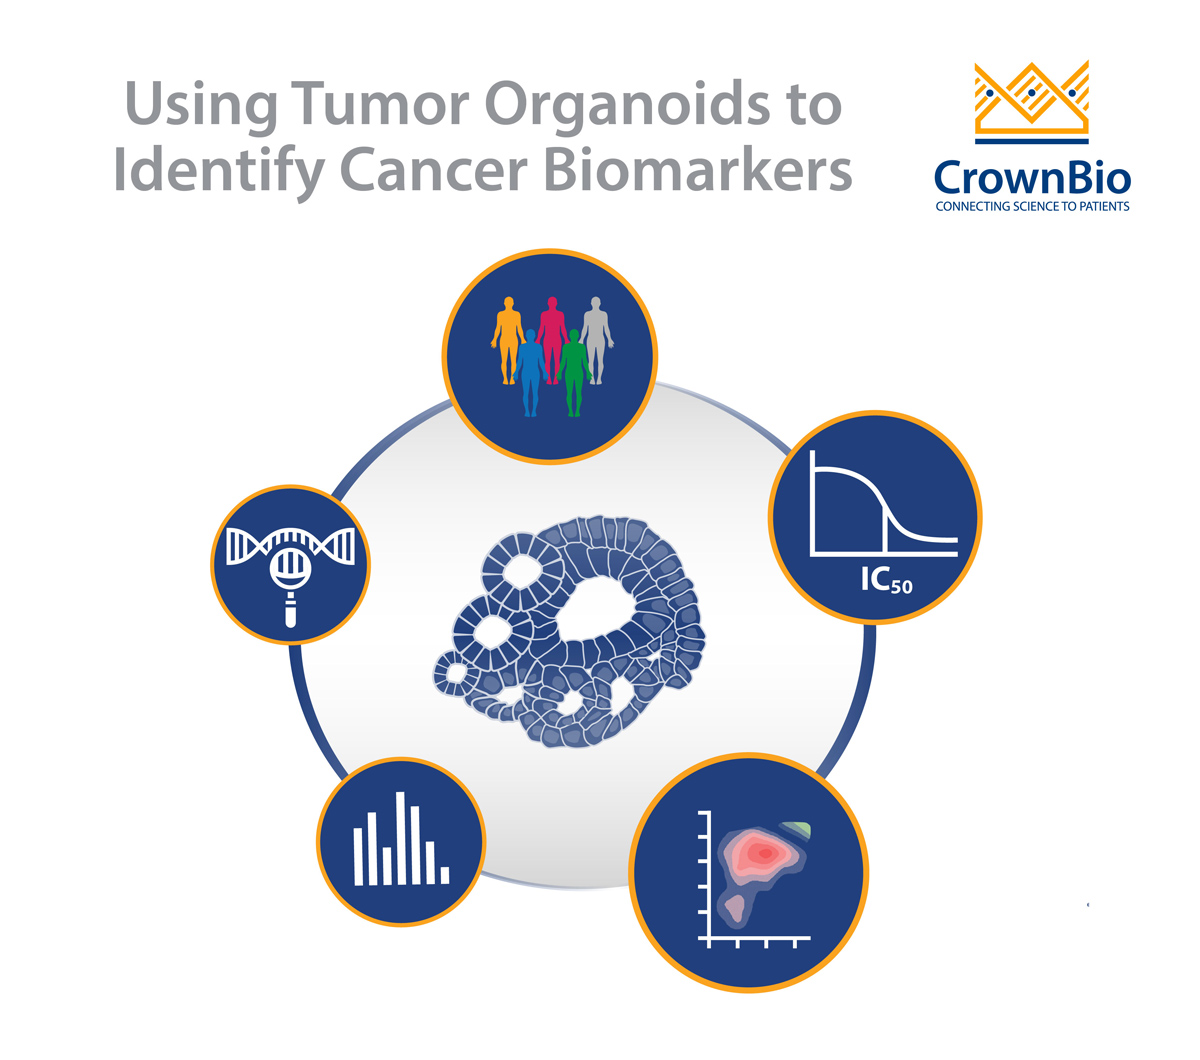 Using Tumor Organoids to Identify Cancer Biomarkers